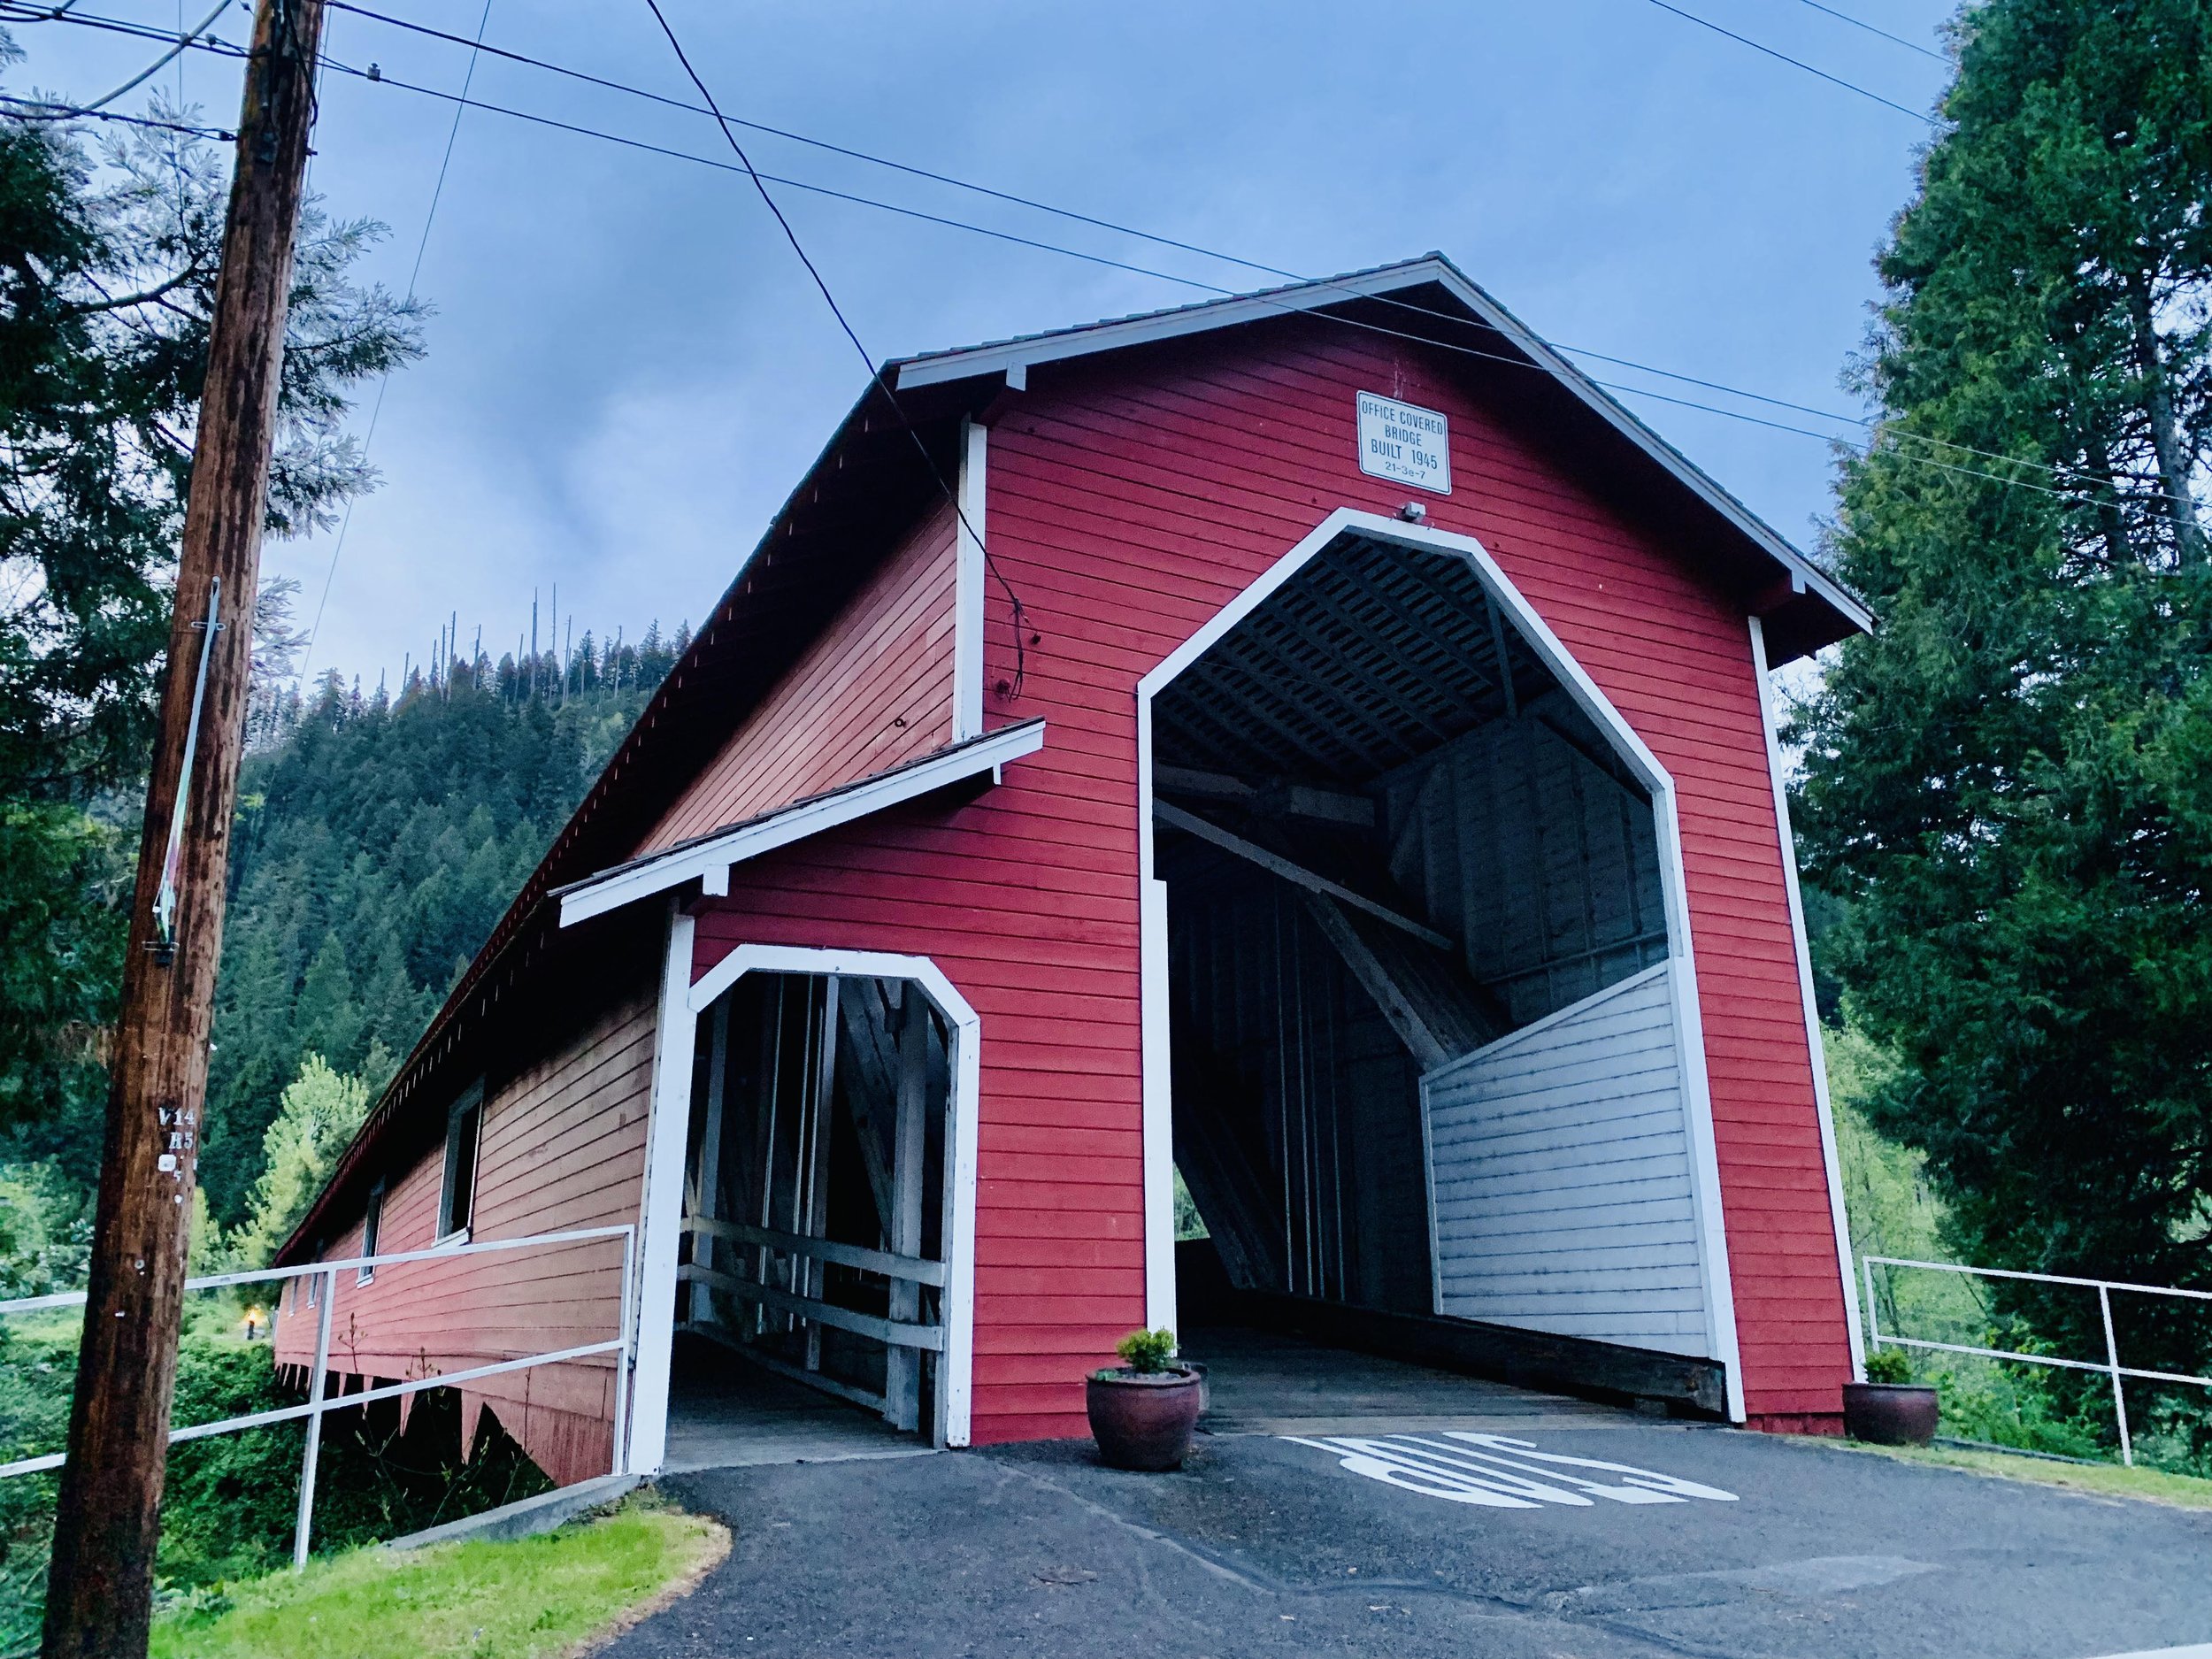 TMM26 Page 32 33 Image he Office covered bridge beside the Westfir Lodge - credit Kate Robertson.jpg